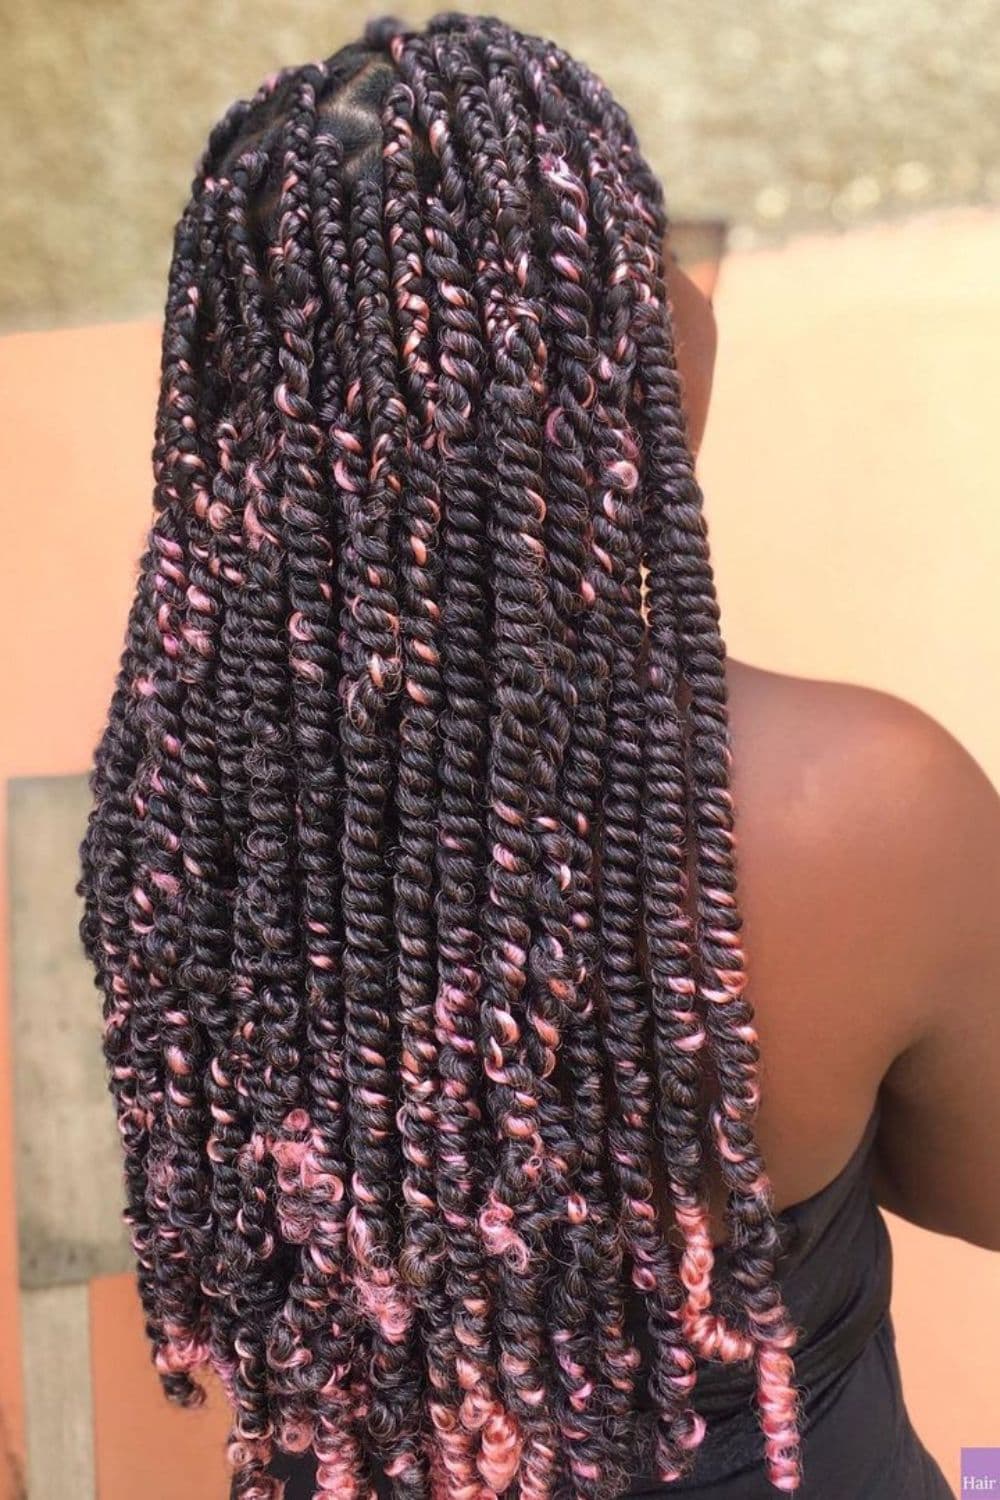 A woman's hair in black and pink chunky passion twists.